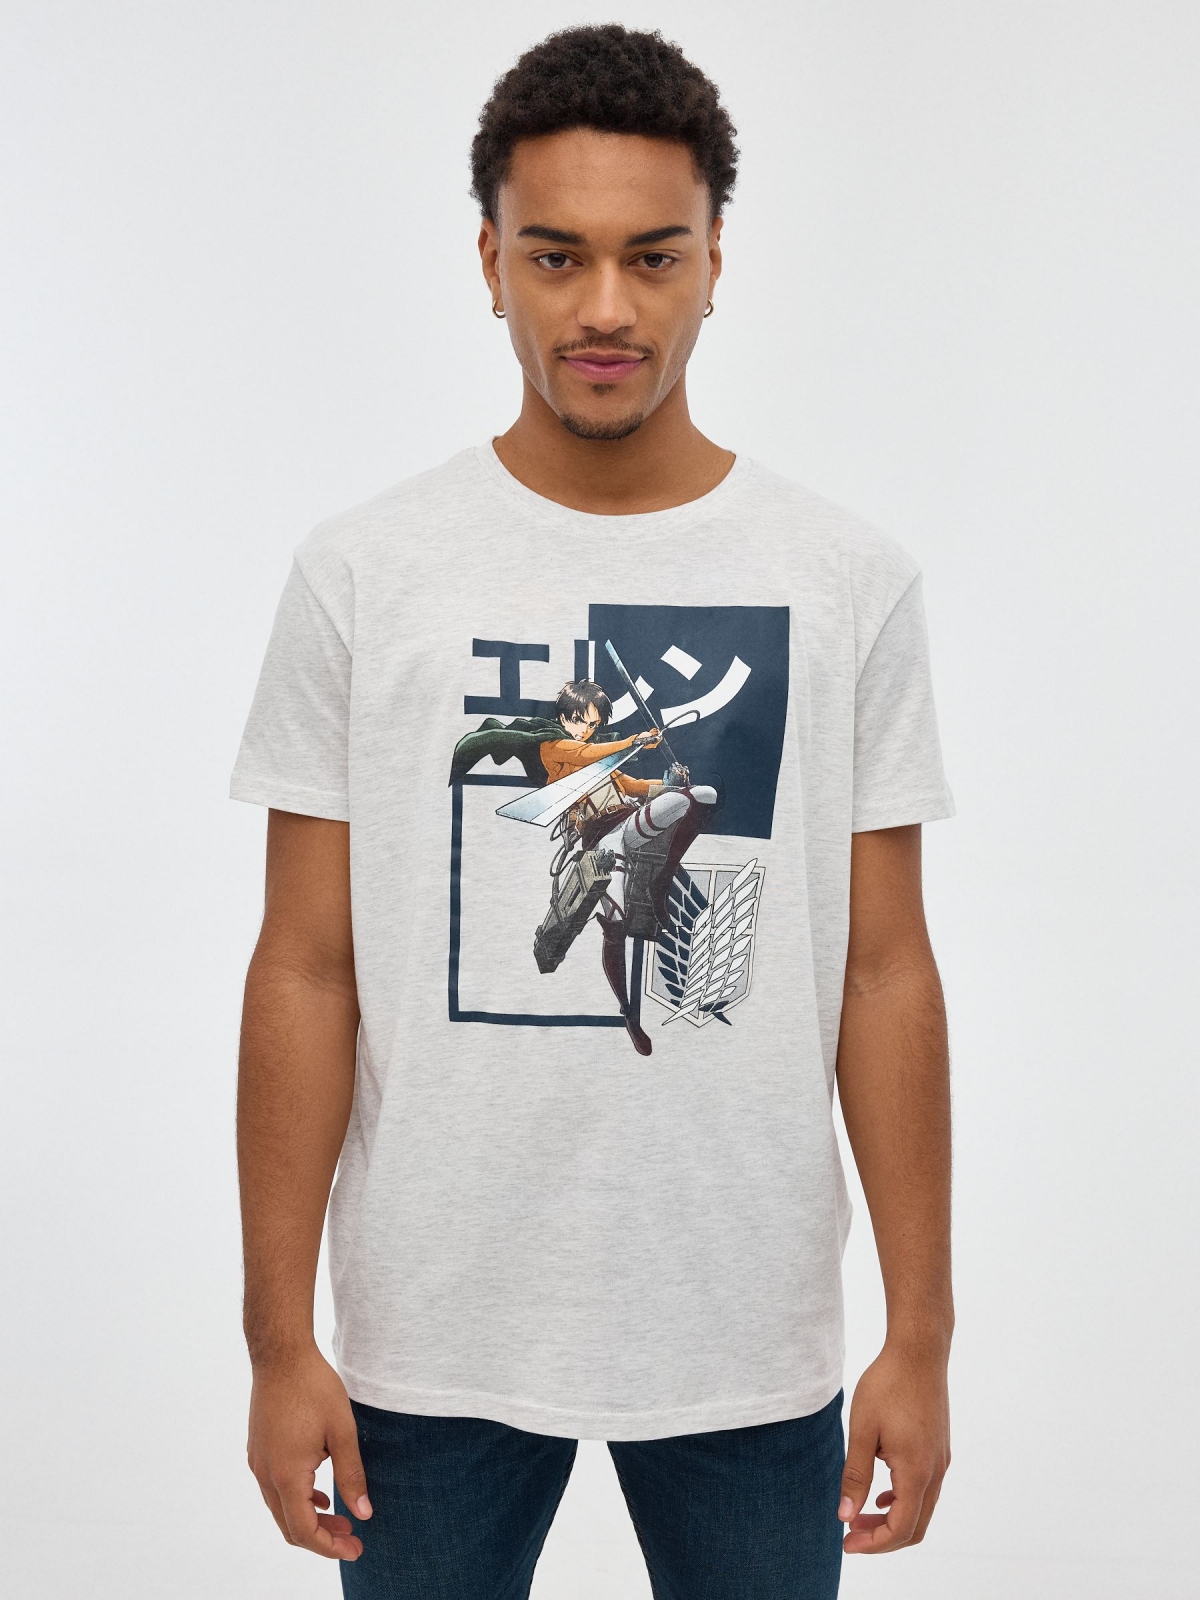 Attack on Titan T-shirt grey middle front view